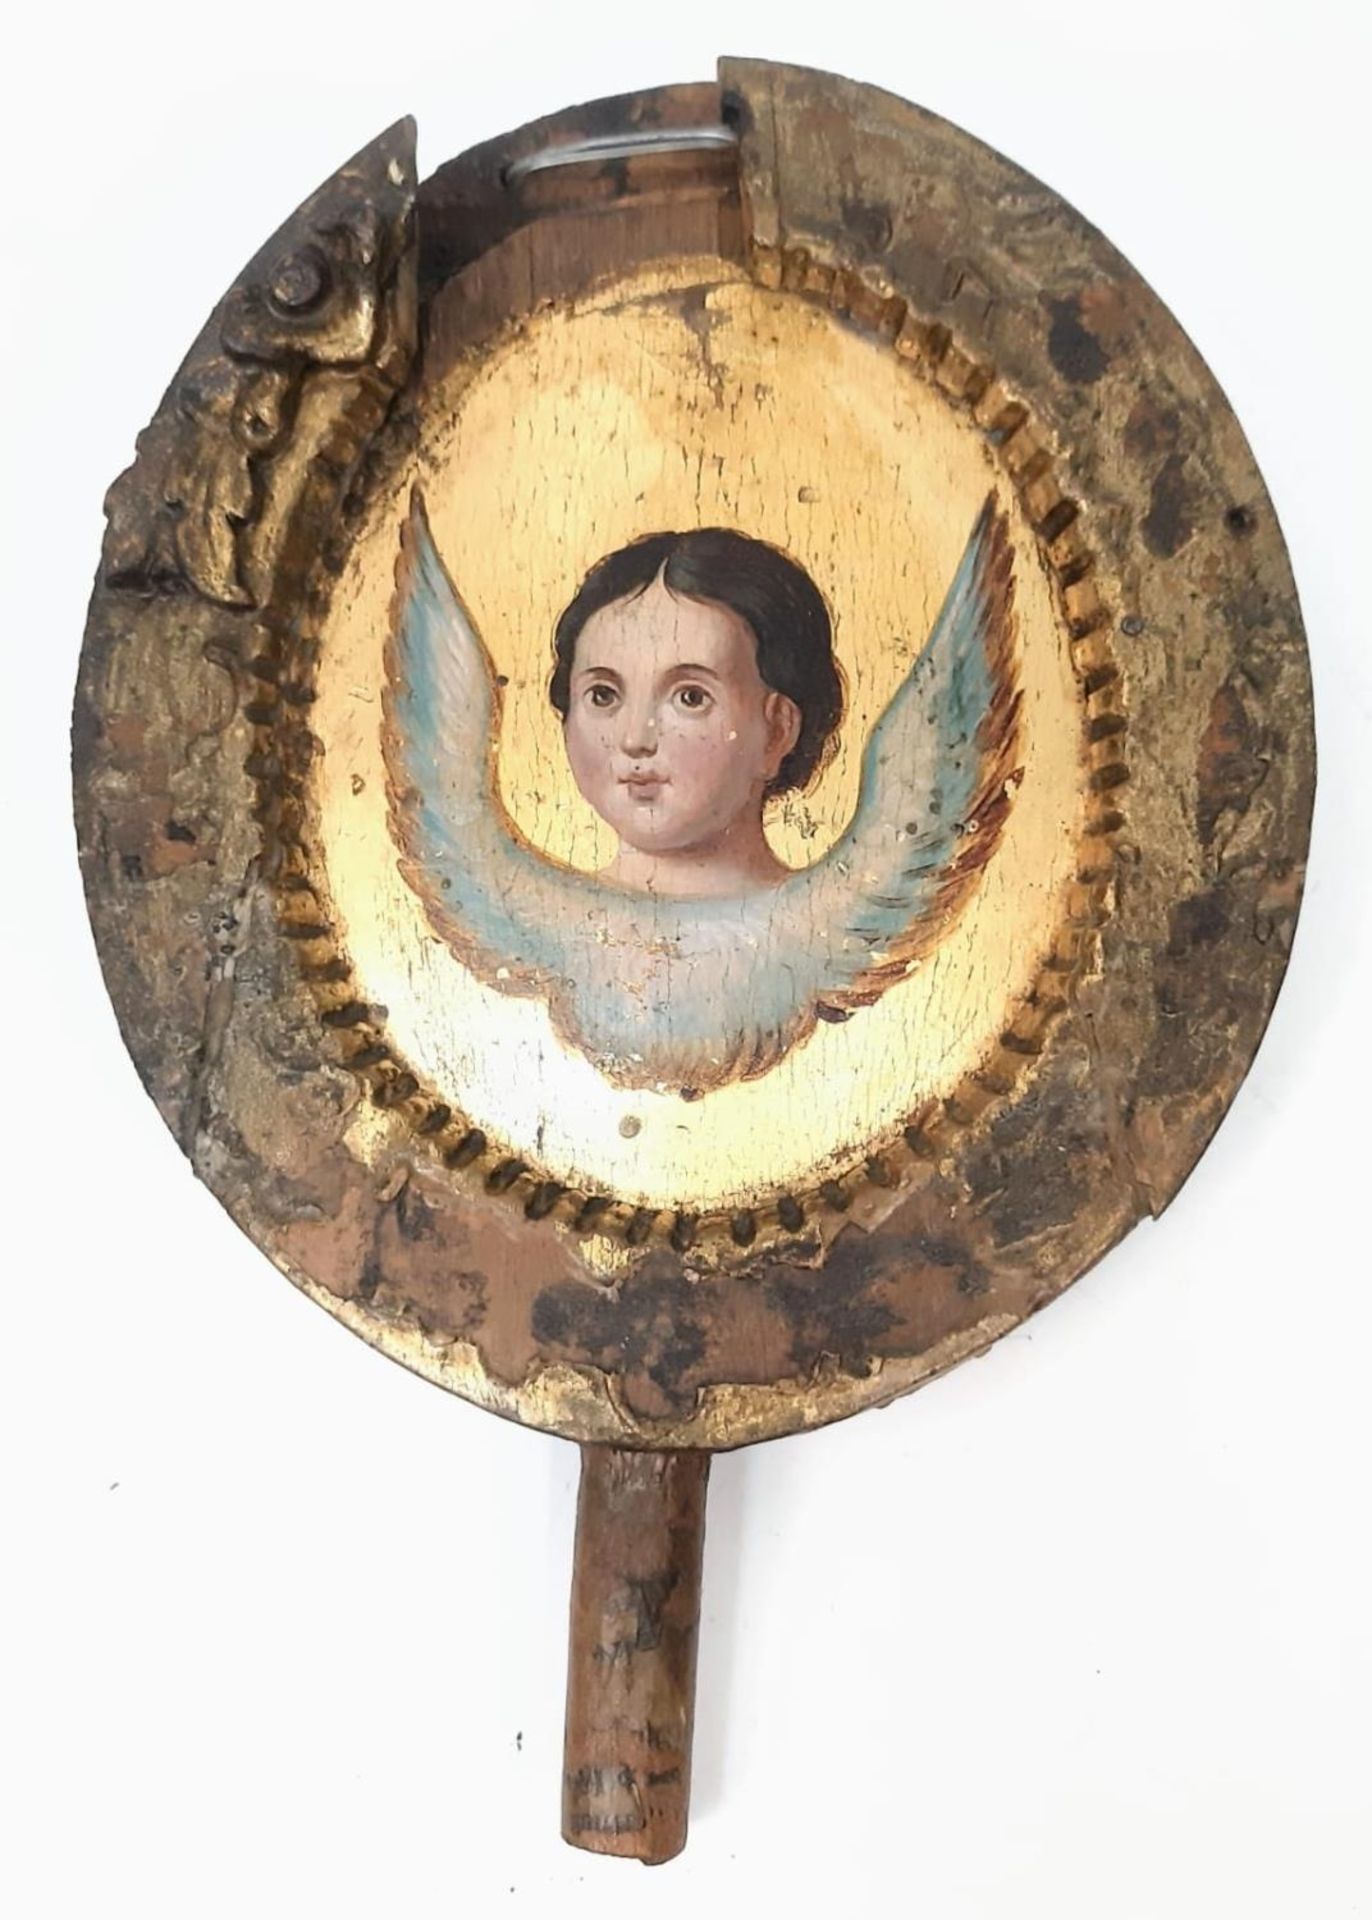 An Antique (Possibly Russian) Liturgical Fan. Oil on wood panel in the form of a winged angel. It